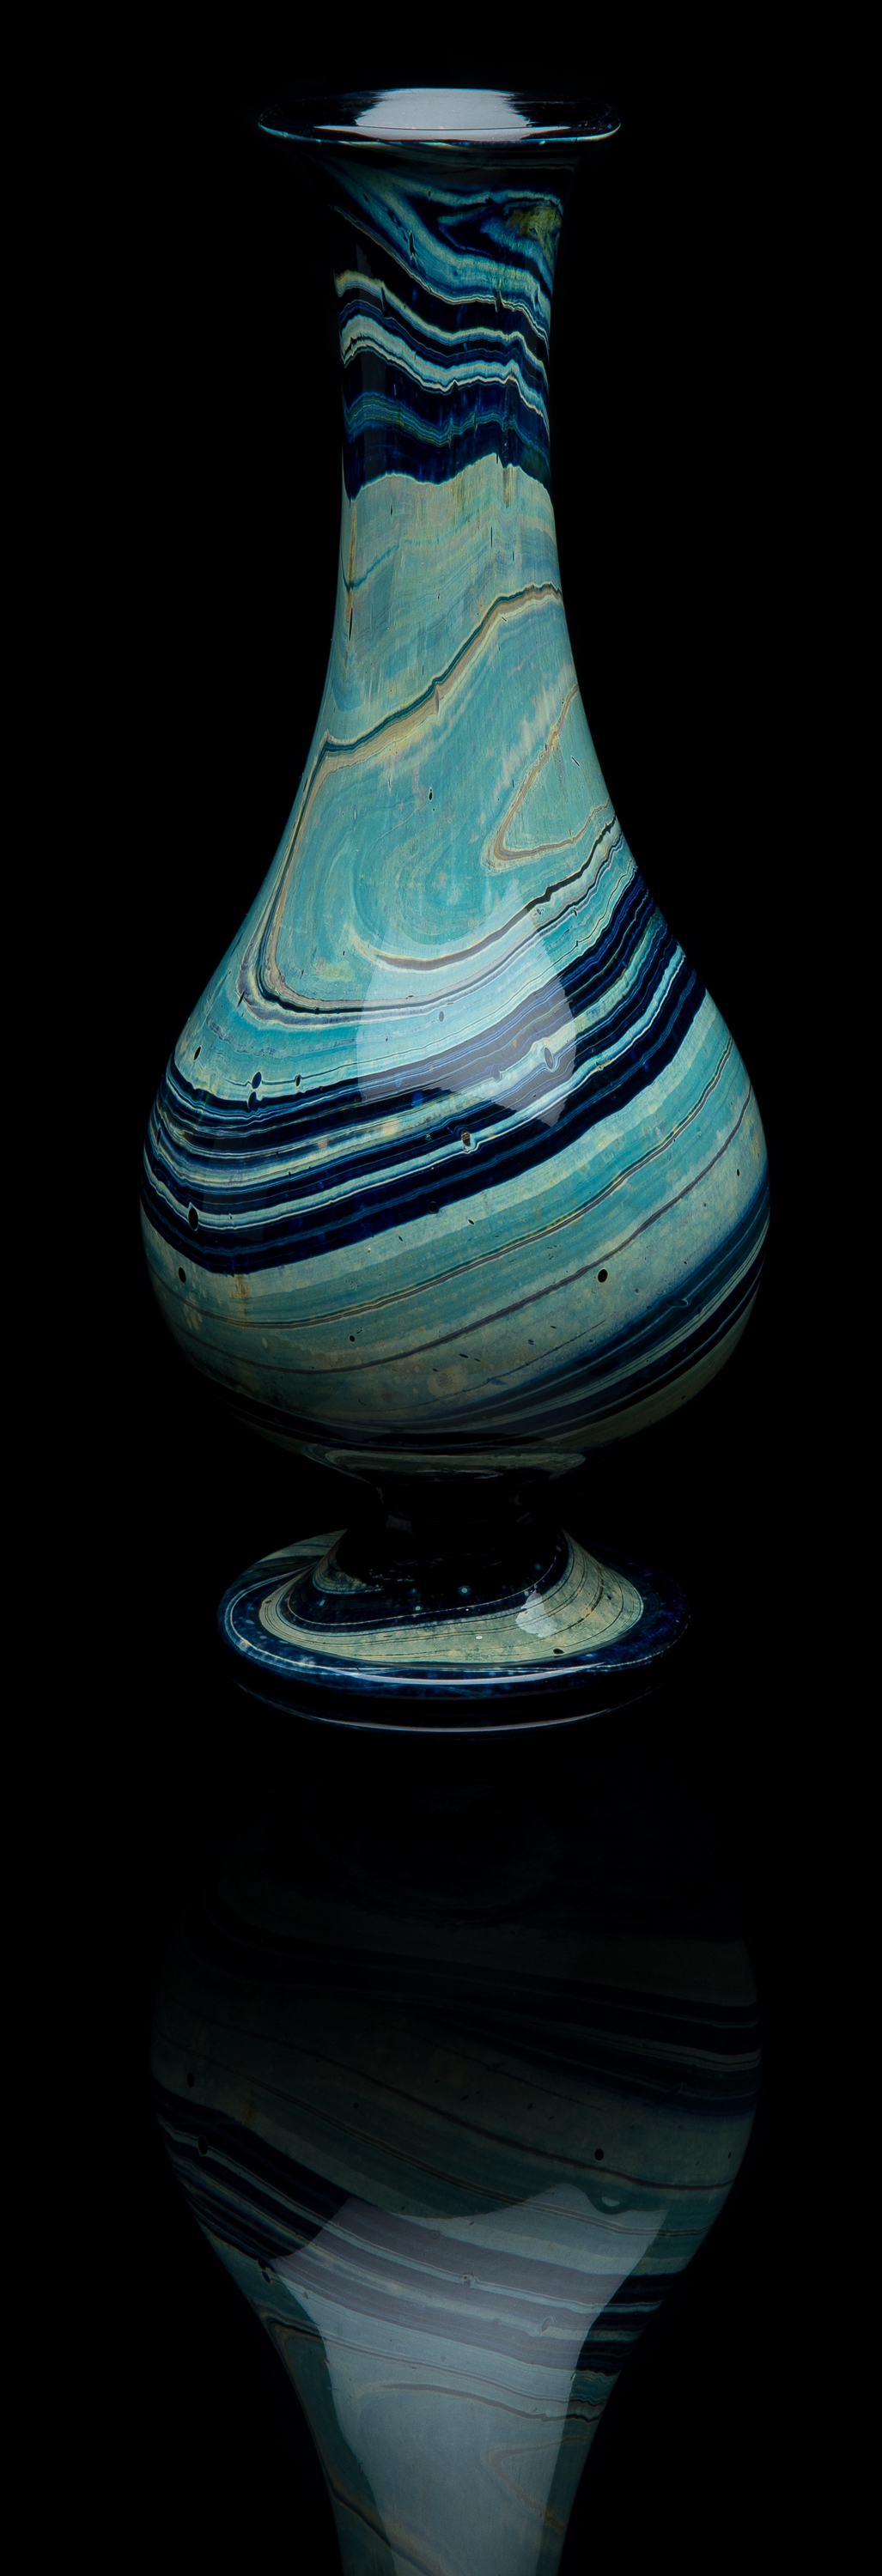  Unknown,  Blue Chalcedony Vase  (circa 1900, glass, 10 inches), VV.1021 